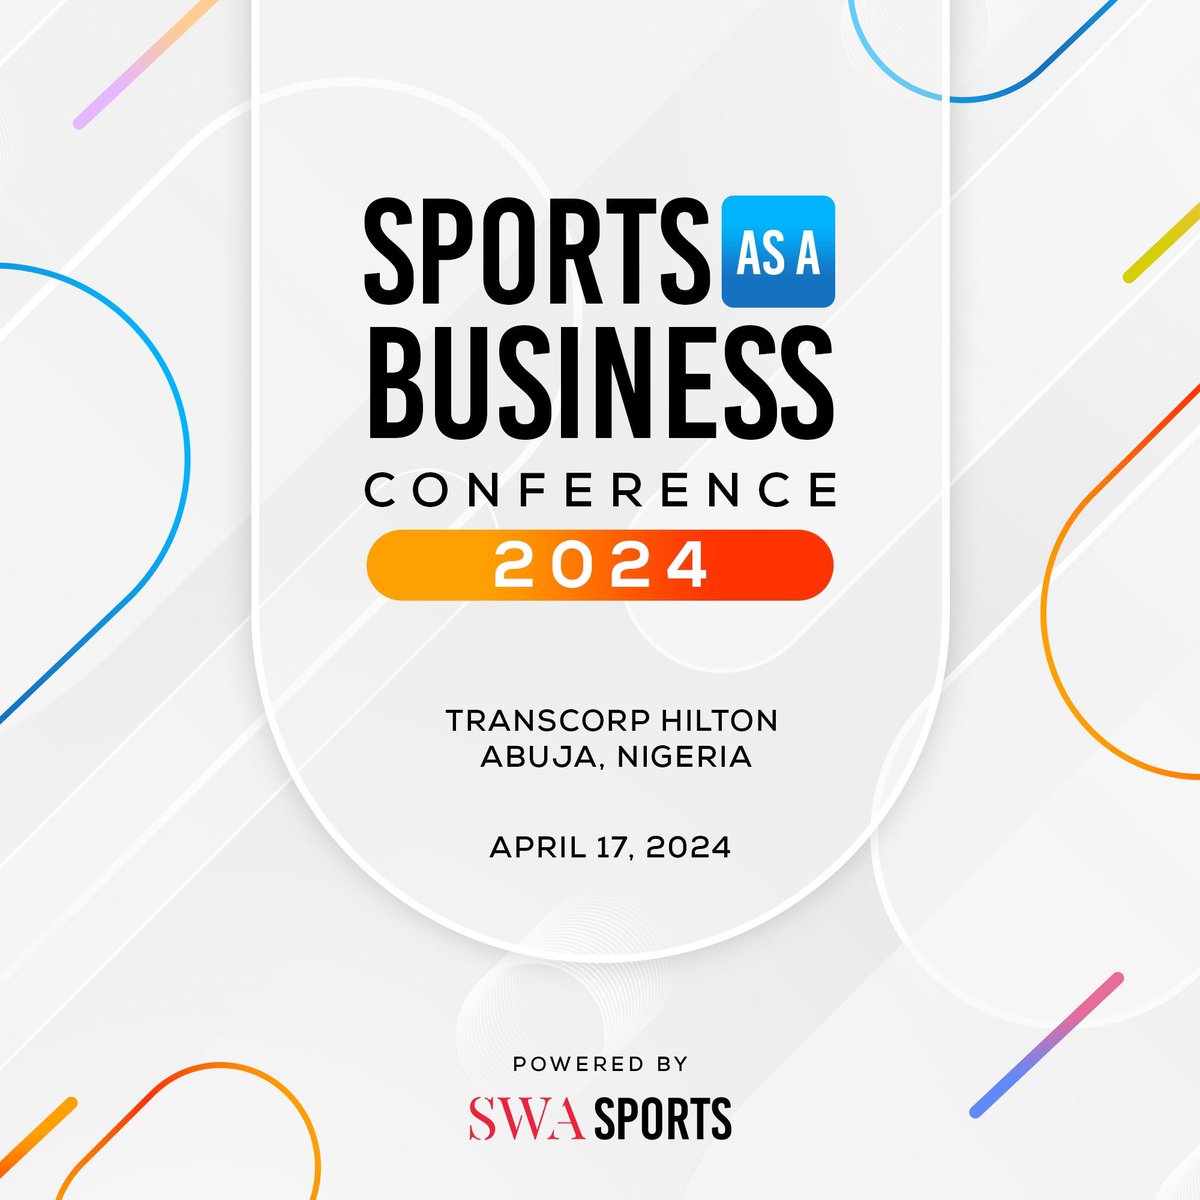 Announcement: My wife, the CEO & Founder of @SWASportsAfrica, Aisha Habibu El-Rufai and her magnificent team present to you the inaugural ‘Sports As A Business Conference 2024’. The high-level dialogue event seeks to explore opportunities,and strategize innovative solutions that